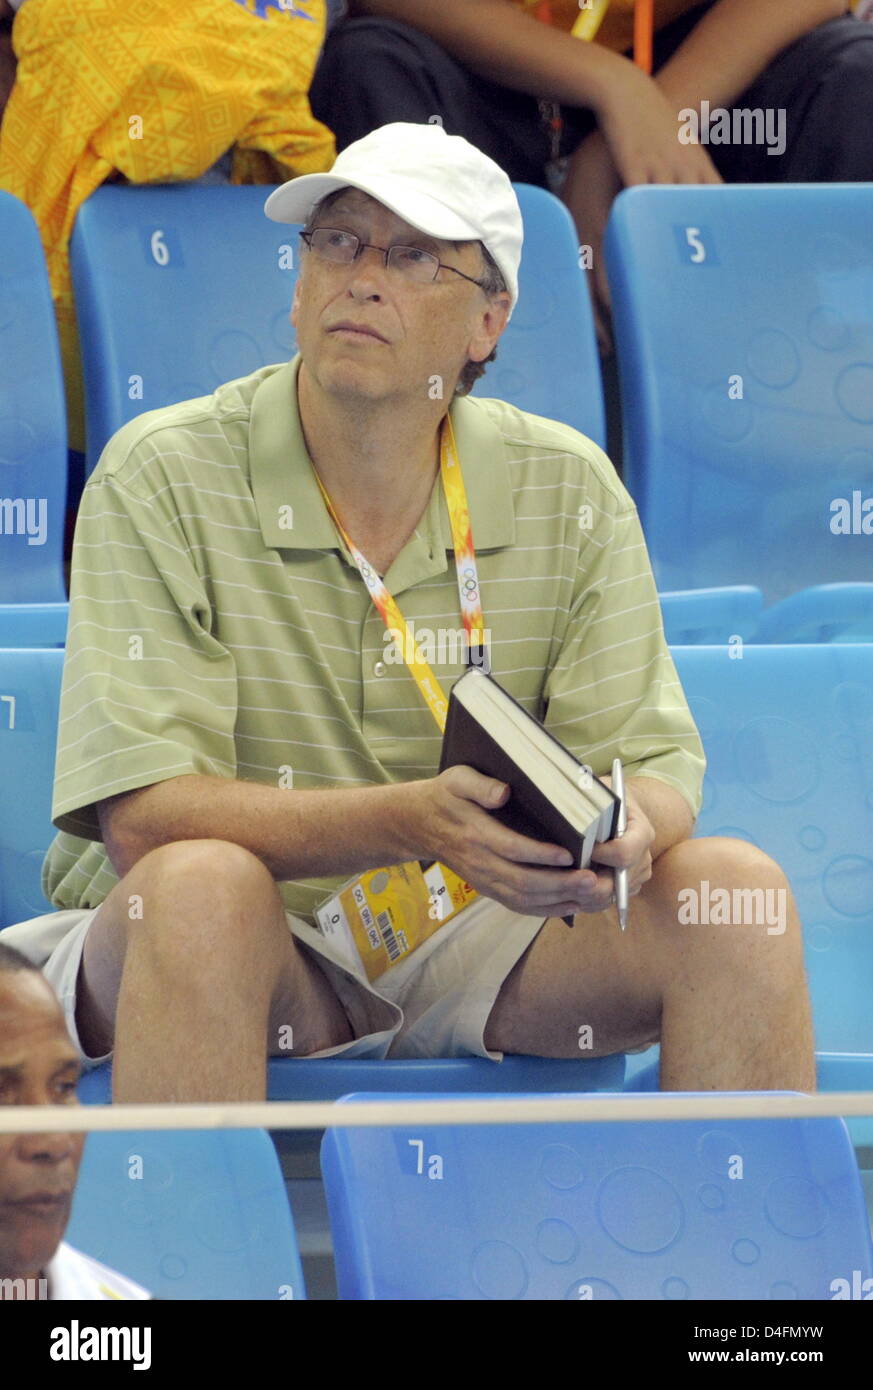 Bill Gates watches the swimming events during the Beijing 2008 Olympic Games, in Beijing, China, 14 August 2008. Photo: Bernd Thissen dpa ###dpa### Stock Photo